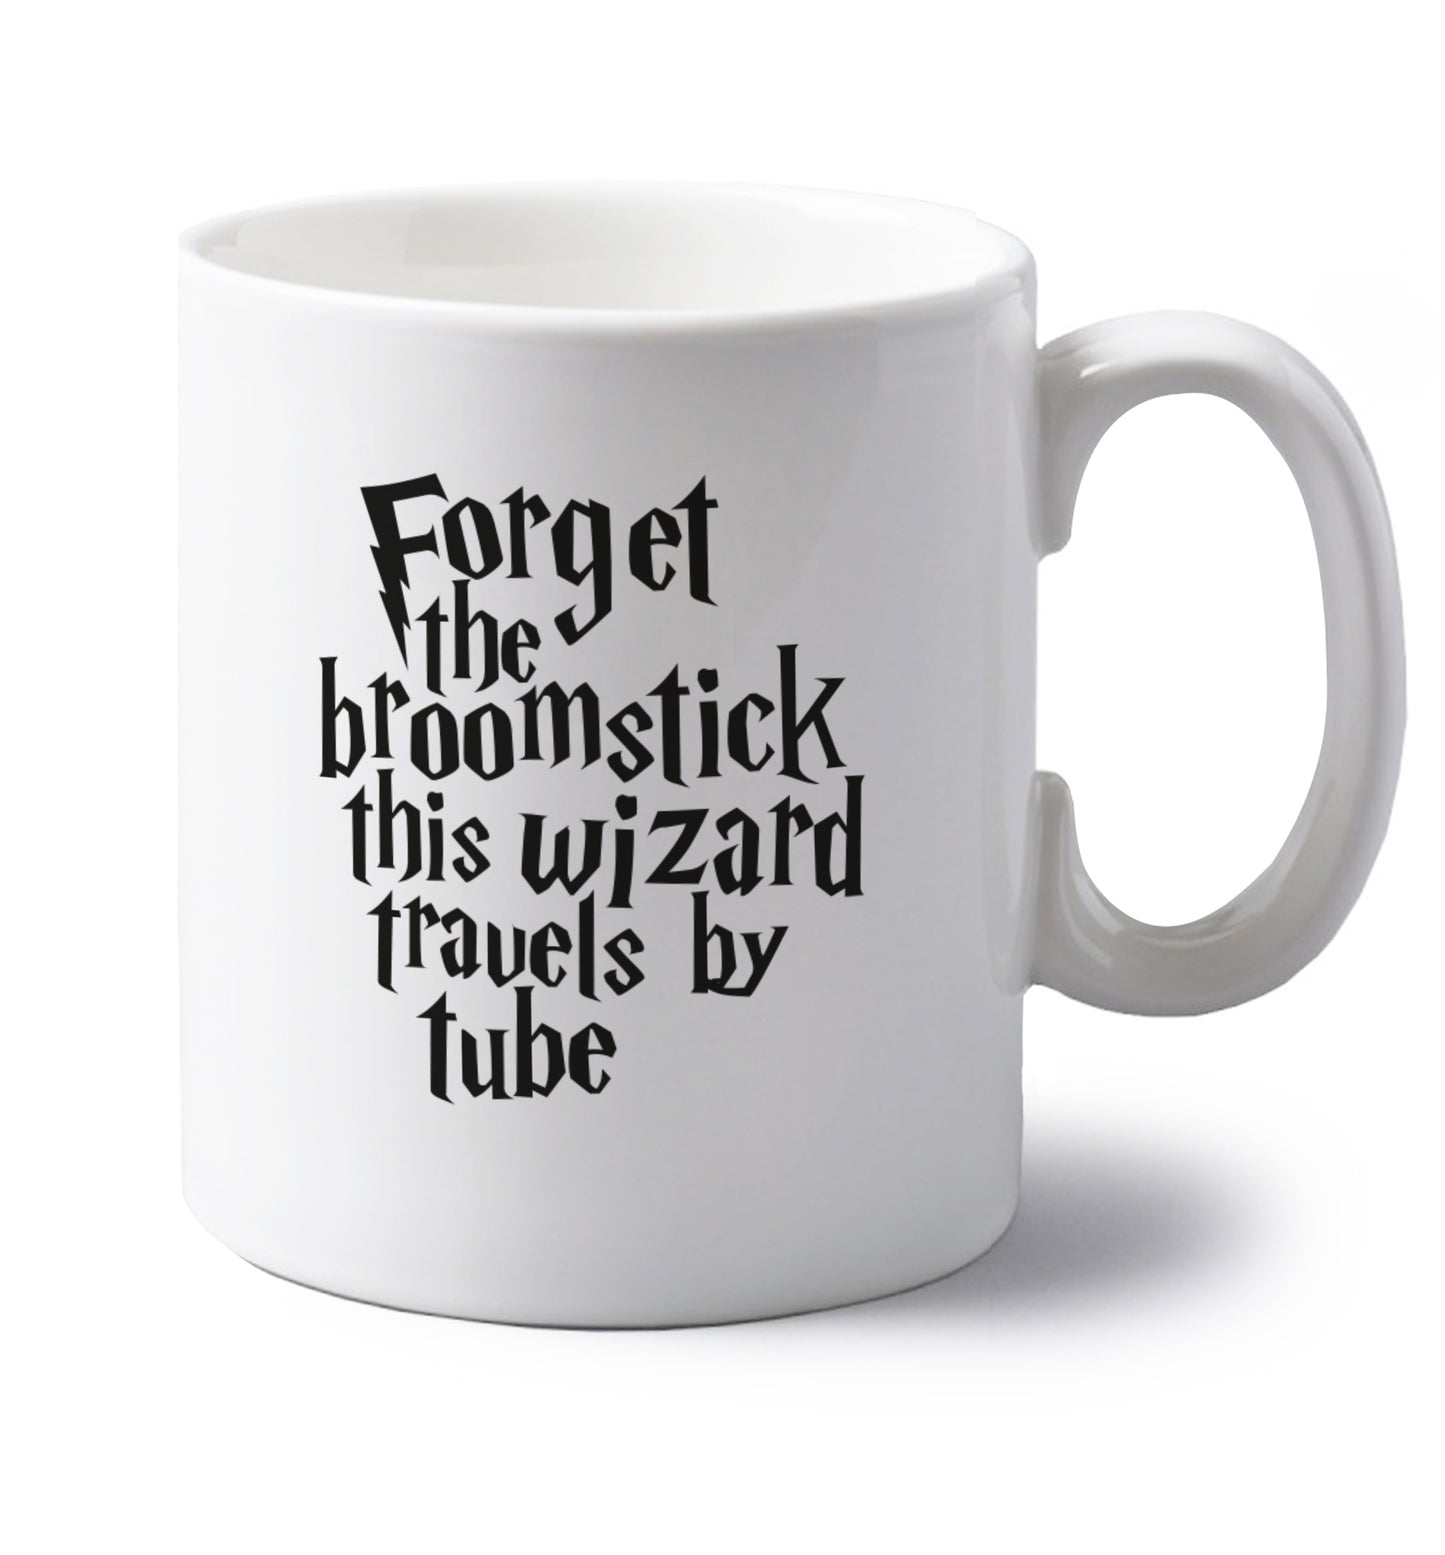 Forget the broomstick this wizard travels by tube left handed white ceramic mug 